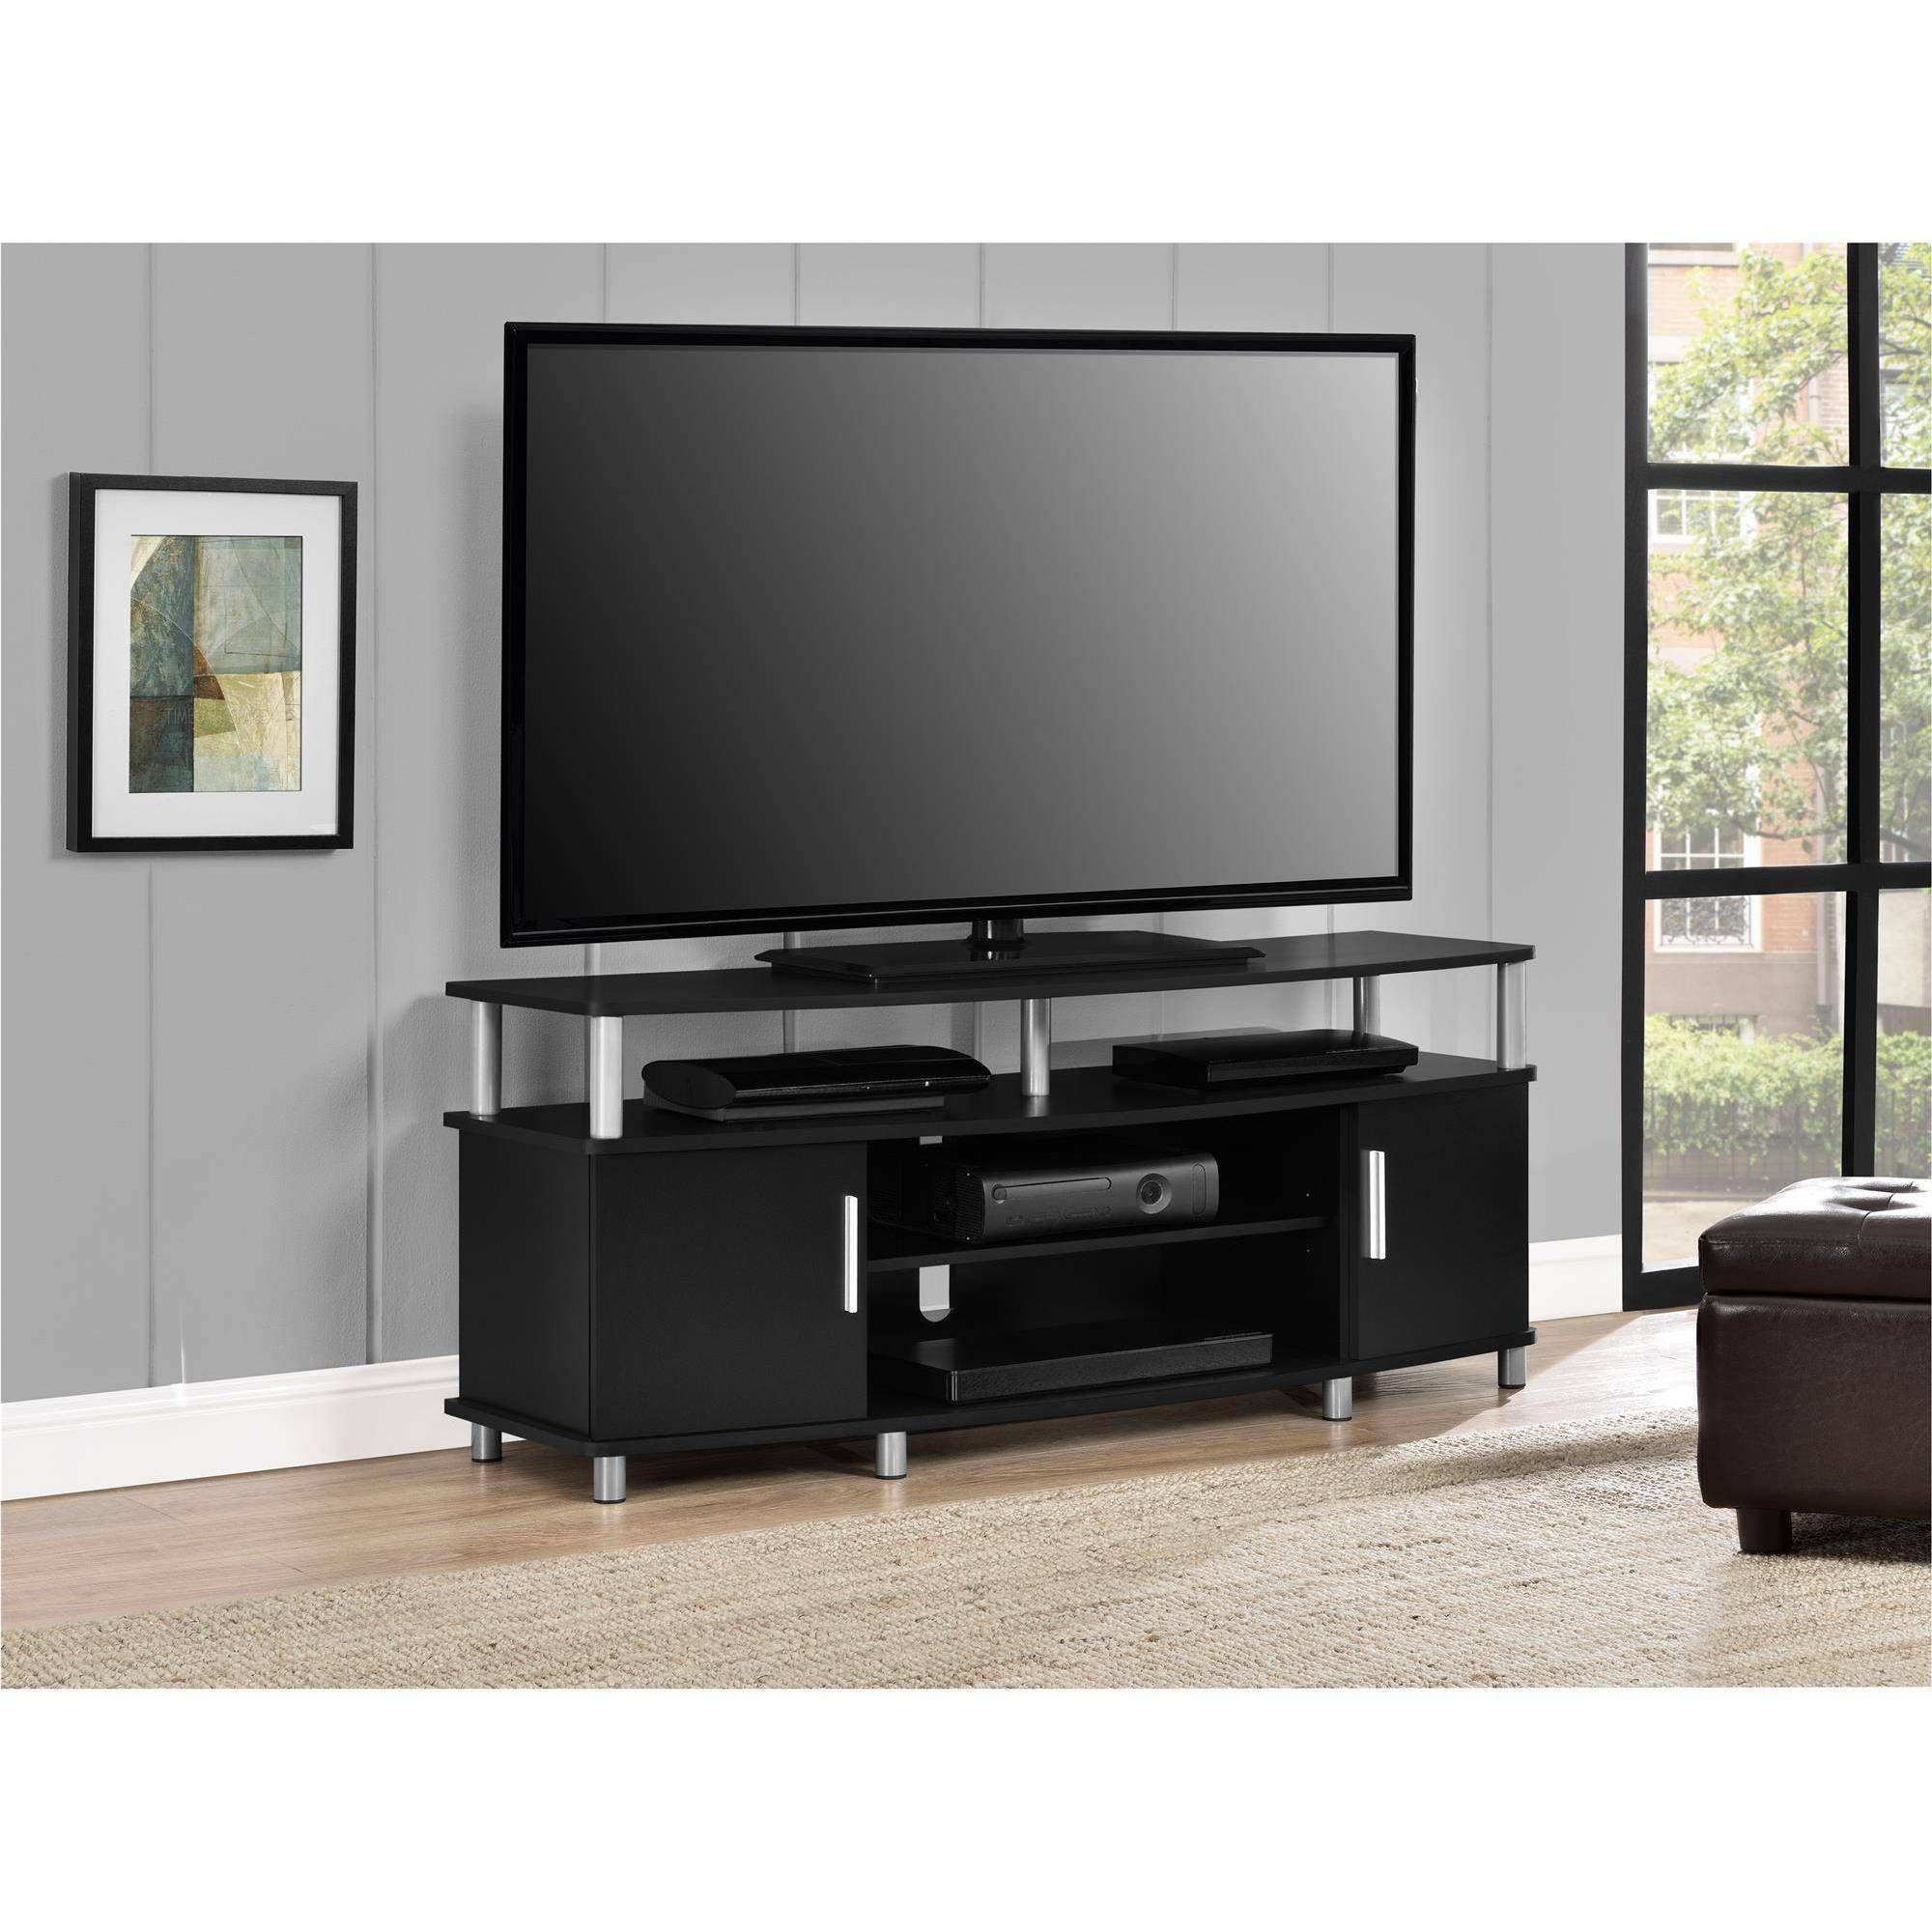 Carson Tv Stand For Tvs Up To 50" Wide, Black – Walmart Intended For Bromley Black Wide Tv Stands (View 7 of 15)